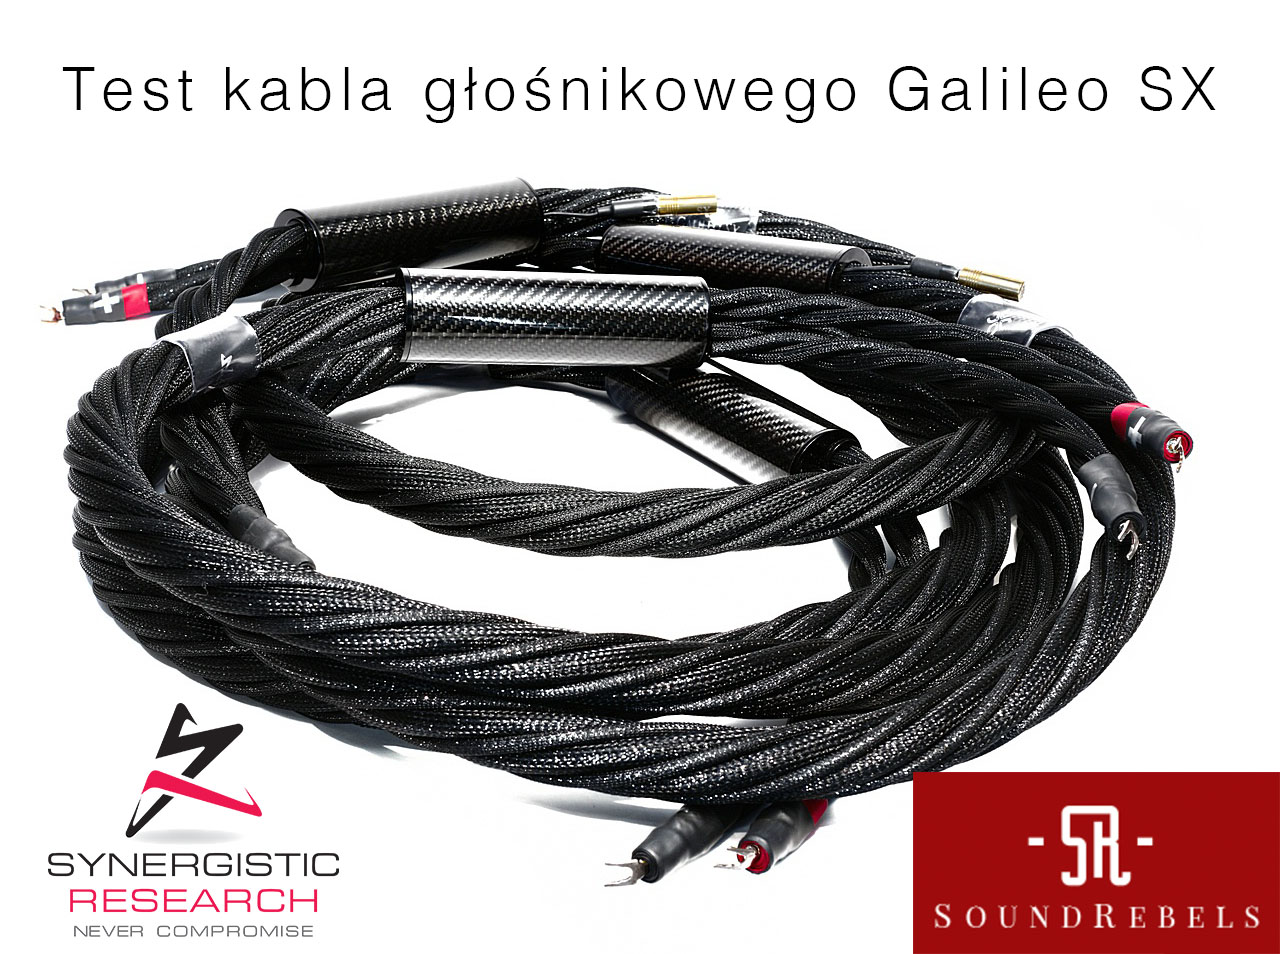 Synergistic Research Galileo SX 0016